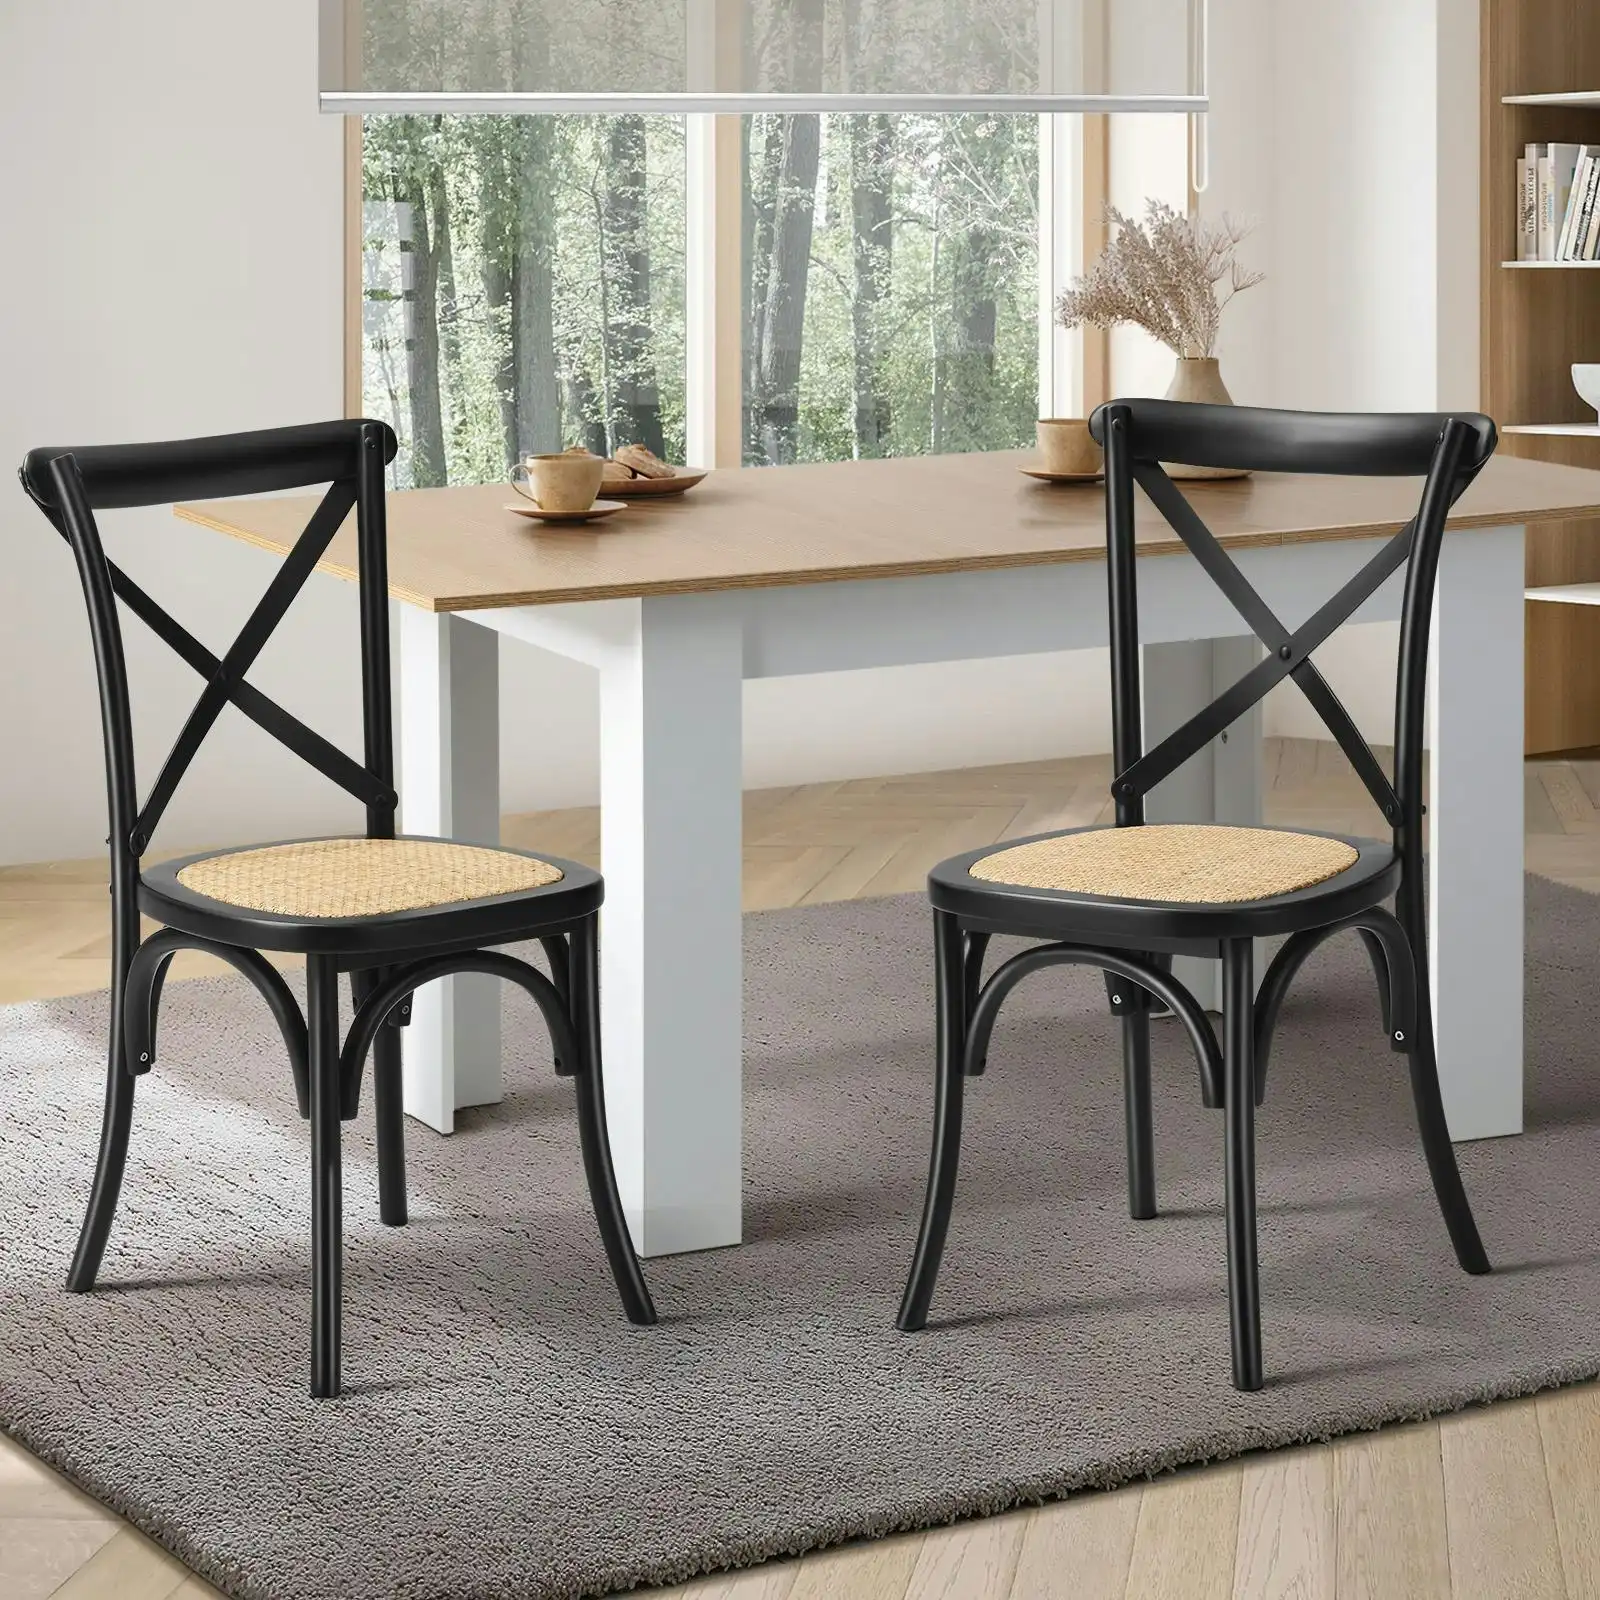 Oikiture 2PCS Crossback Dining Chair Solid Birch Timber Wood Ratan Seat Black